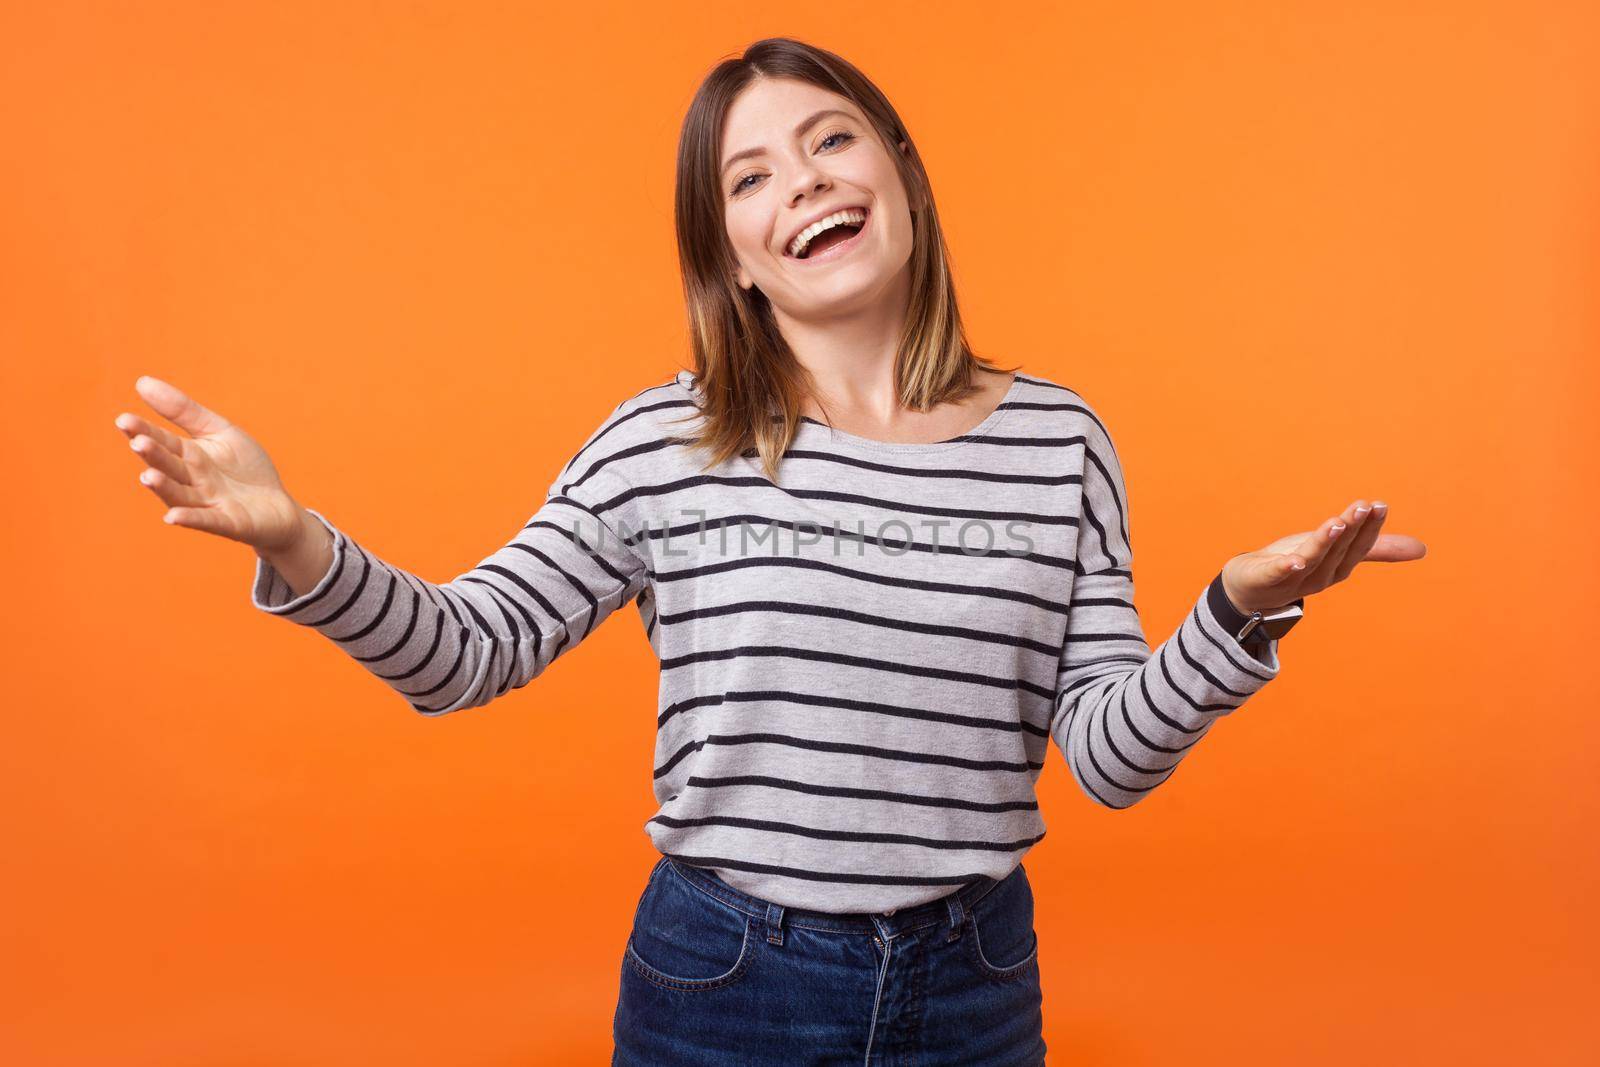 Free hugs. Come here. Portrait of friendly young woman with brown hair in long sleeve shirt standing with raised arms, welcoming and going to embrace. indoor studio shot isolated on orange background